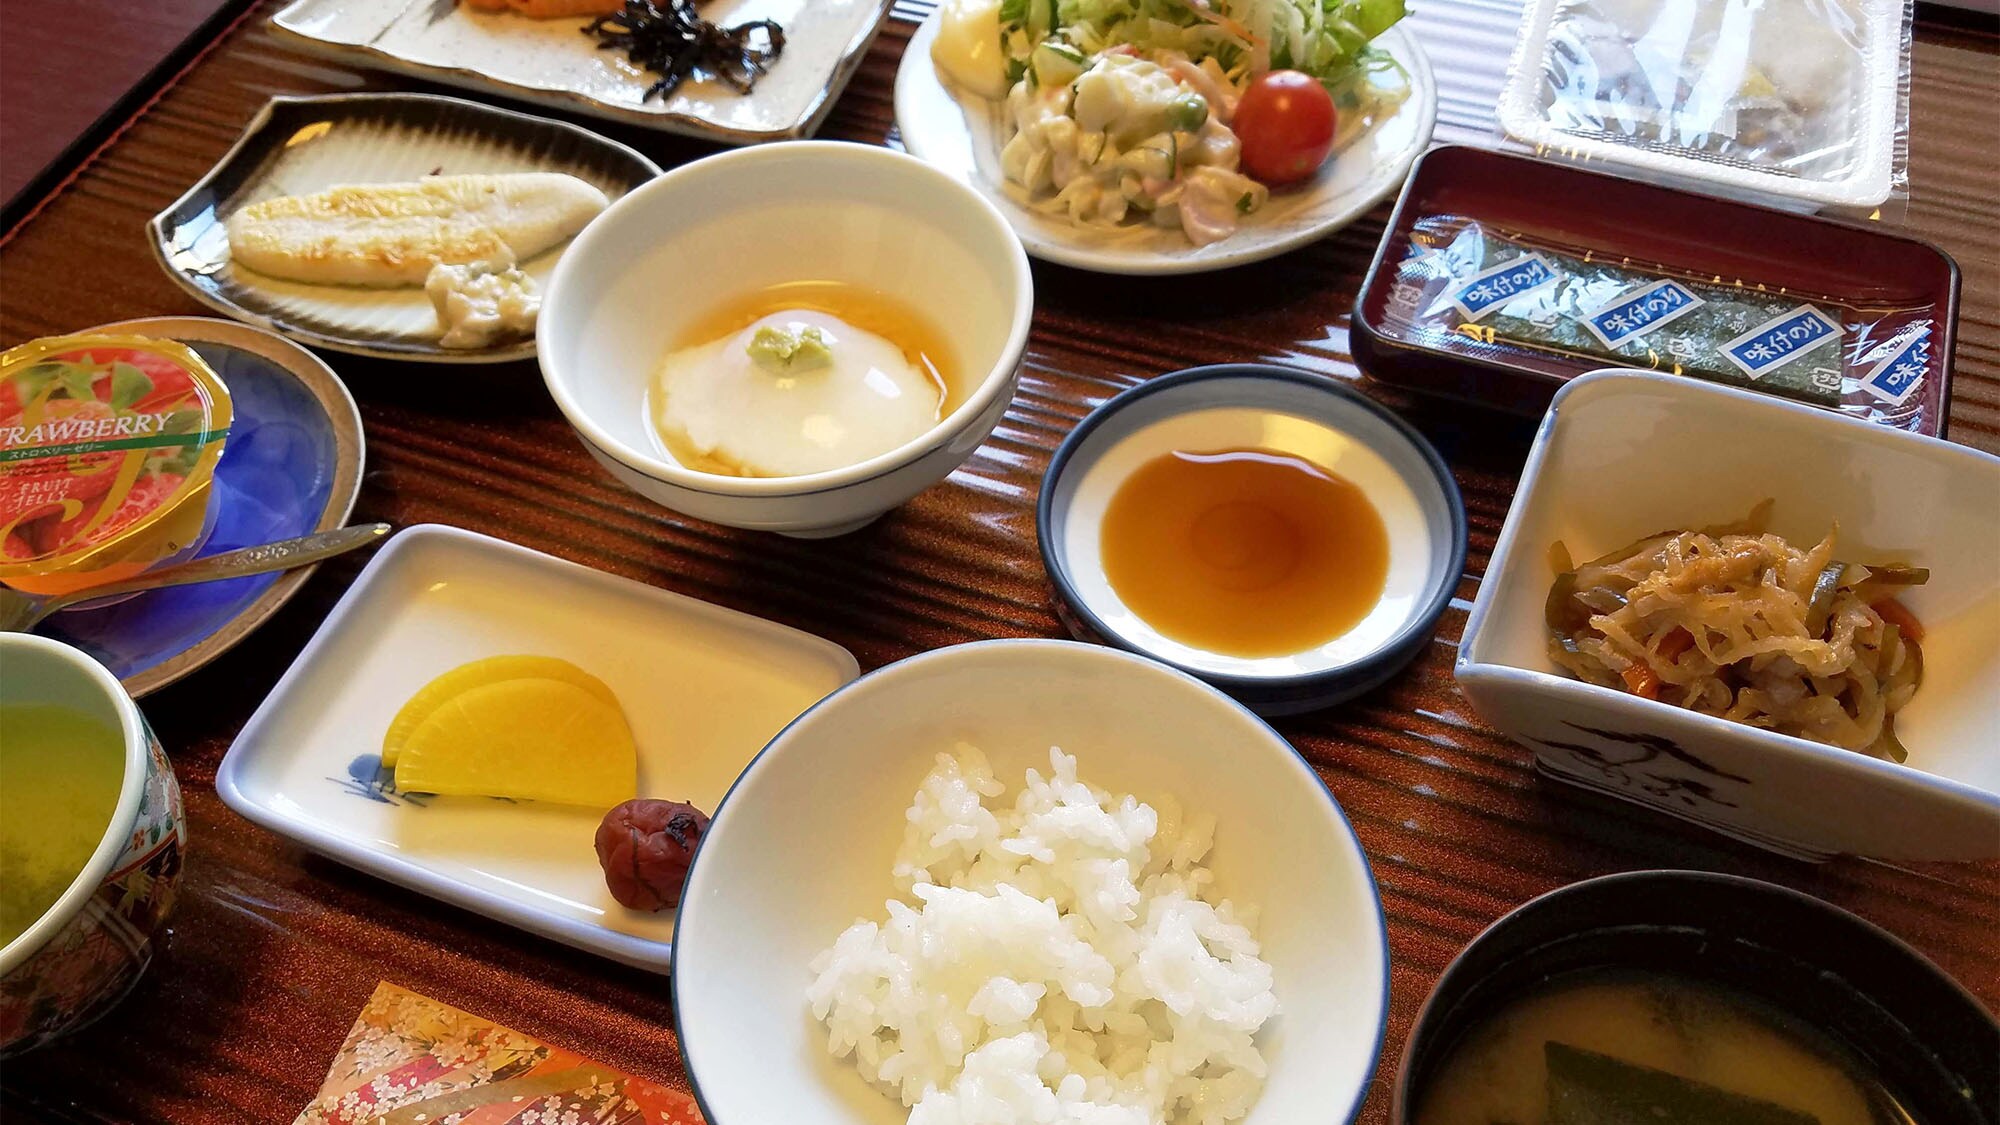 ・ [Breakfast example] We will prepare a daily Japanese meal.